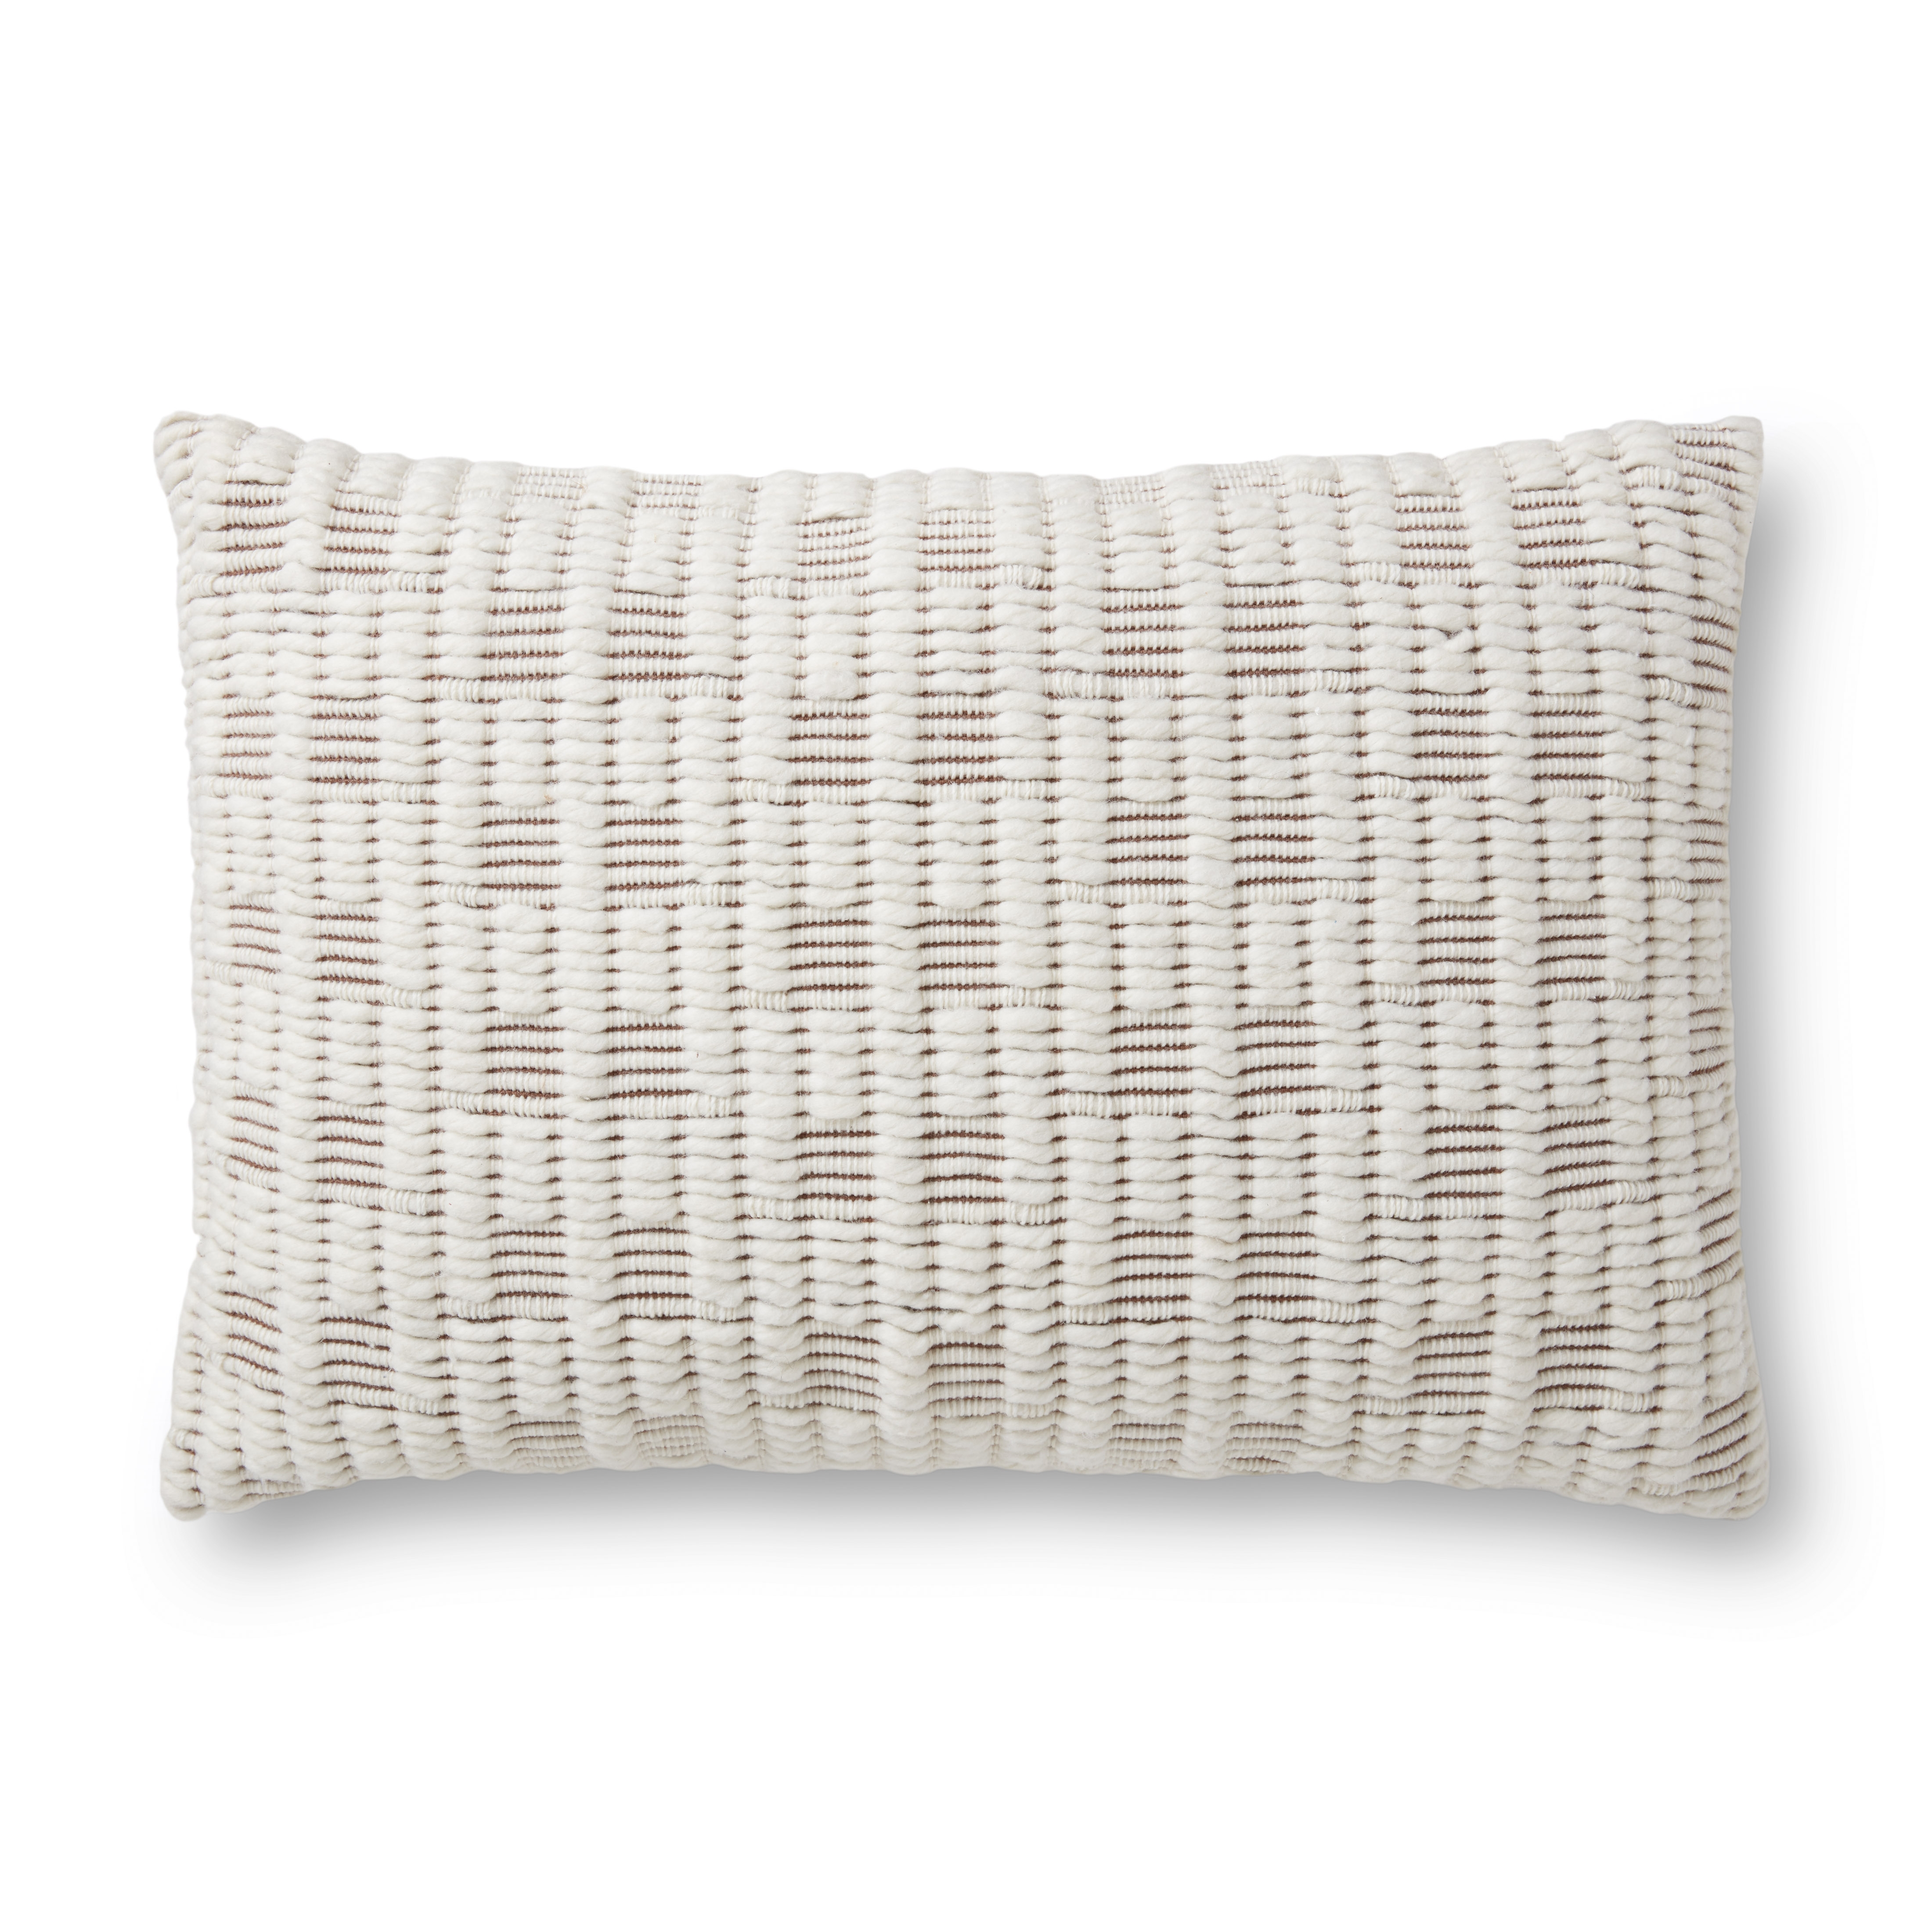 PILLOWS PMH0012 IVORY / COFFEE 16" x 26" Cover Only - Image 0